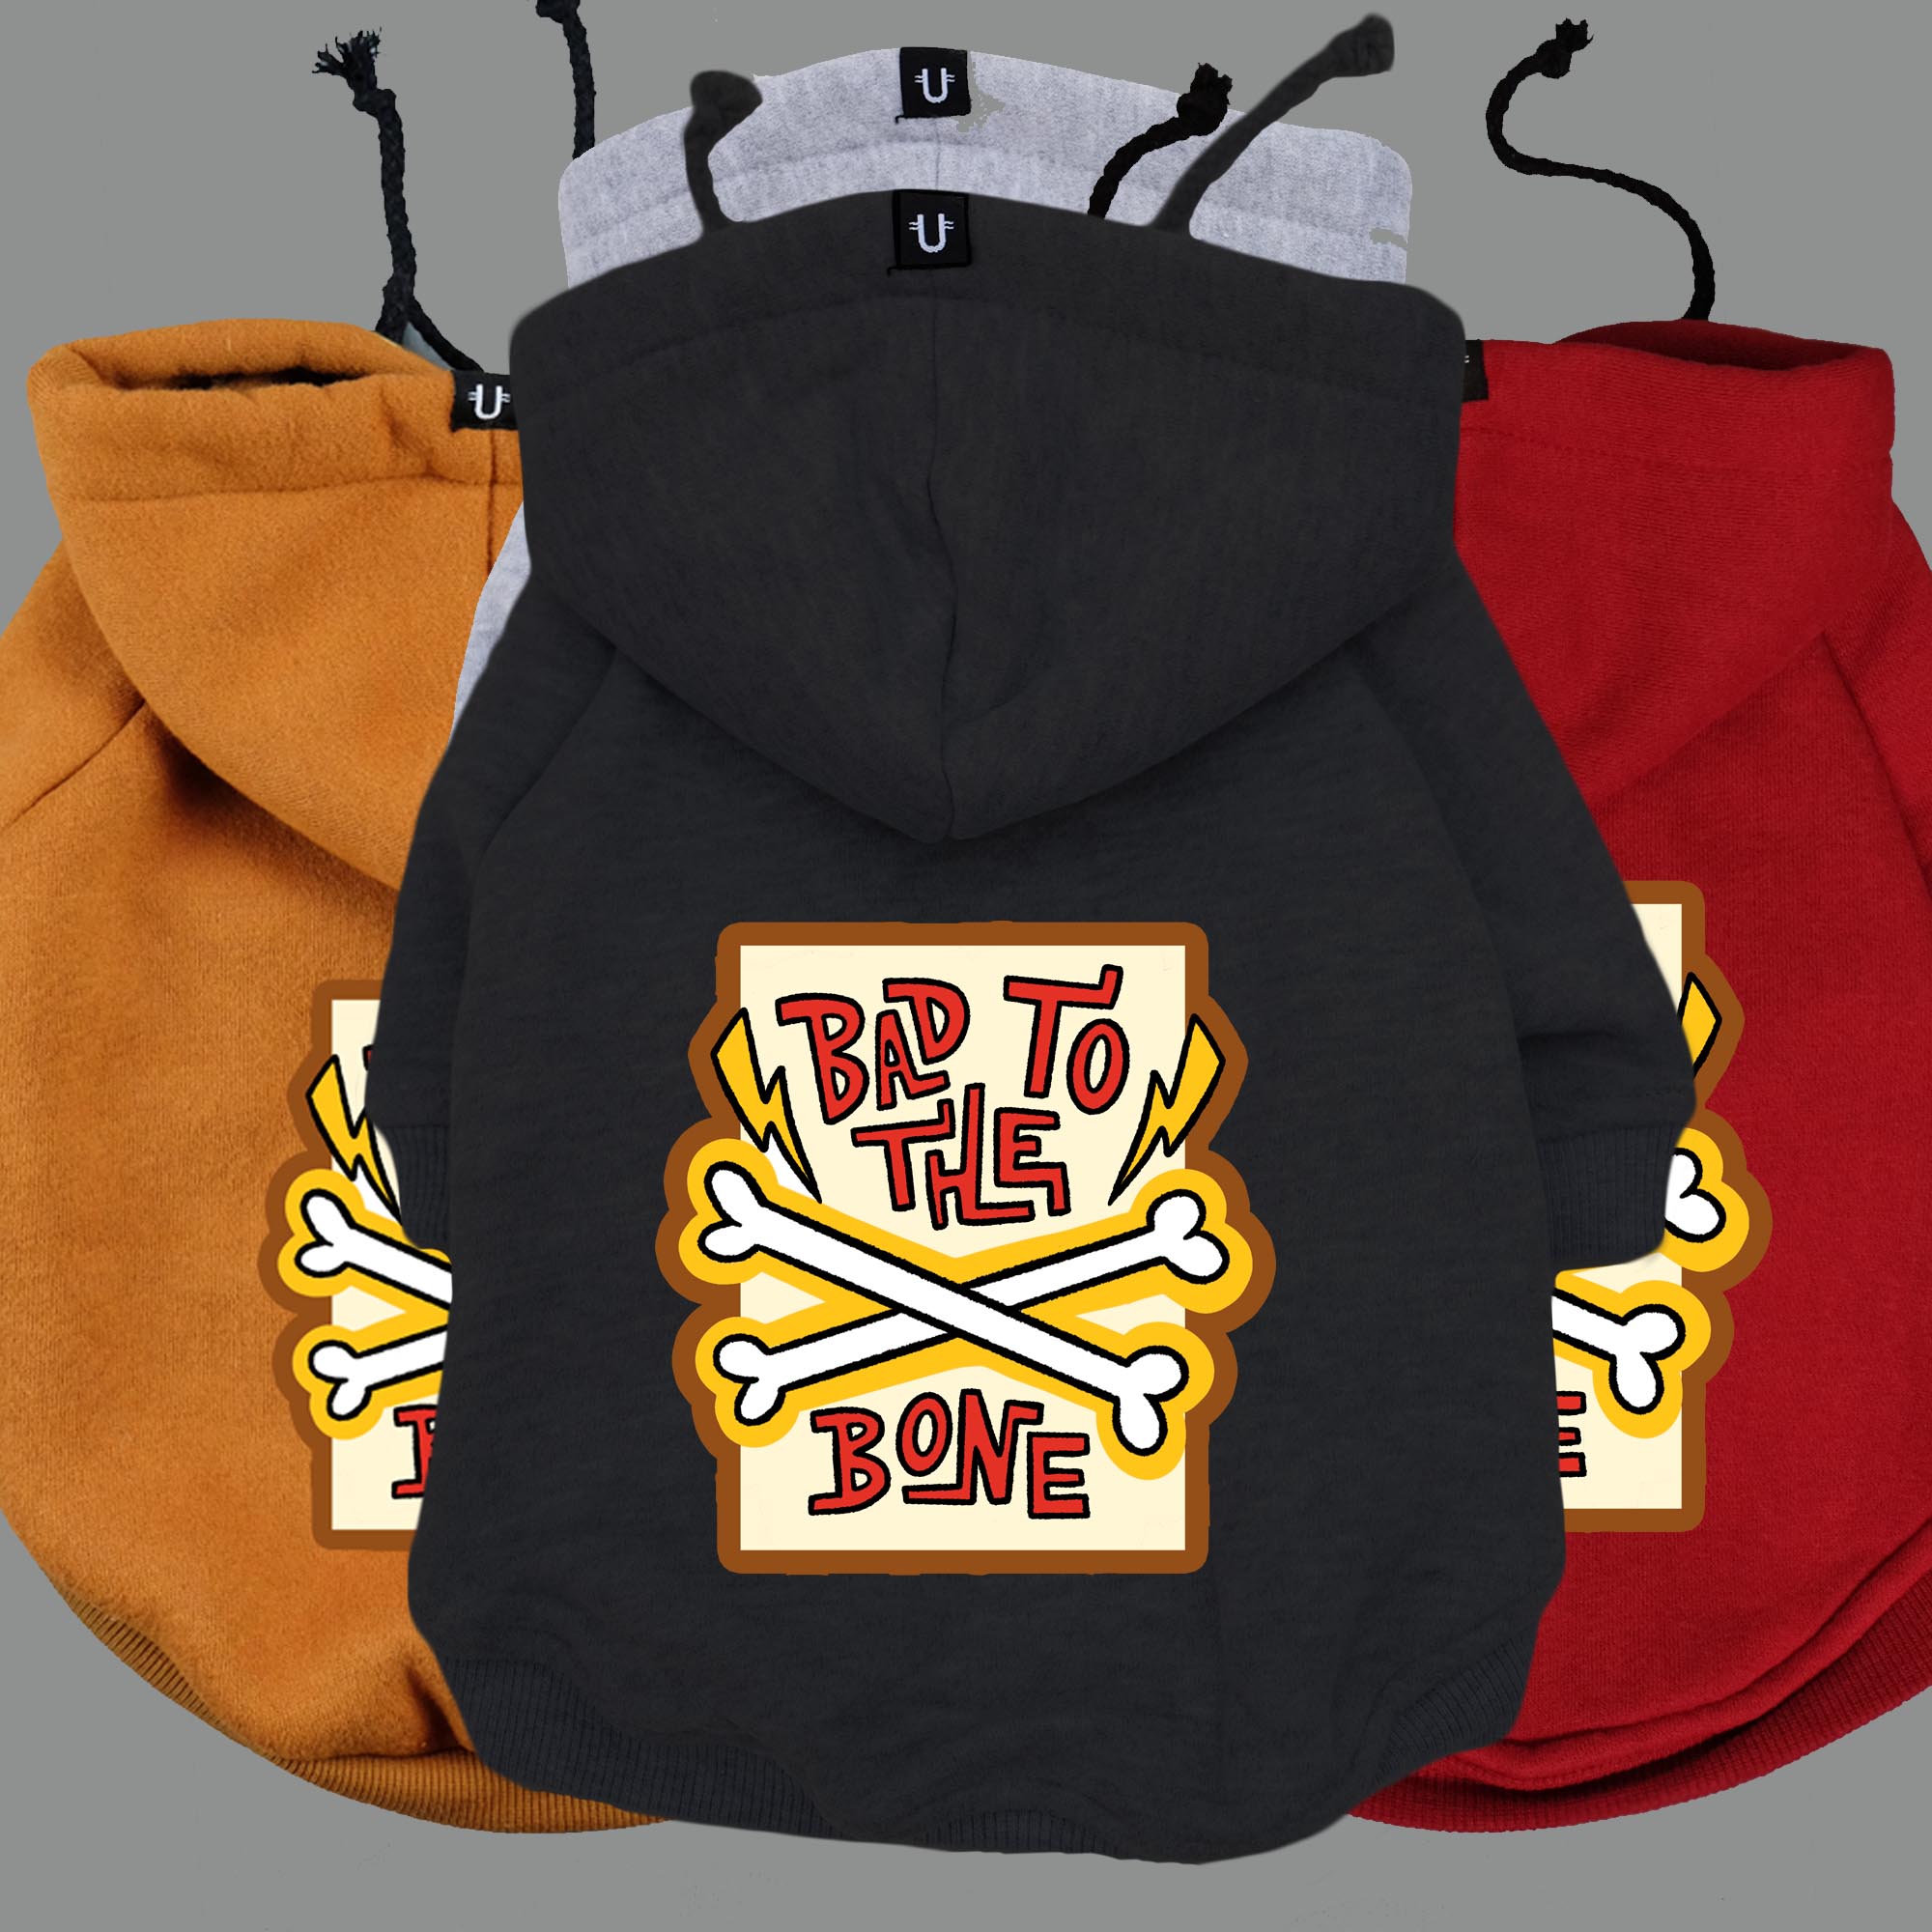 Bad to the bone dog hoodie by Ginger Taylor and Pethaus